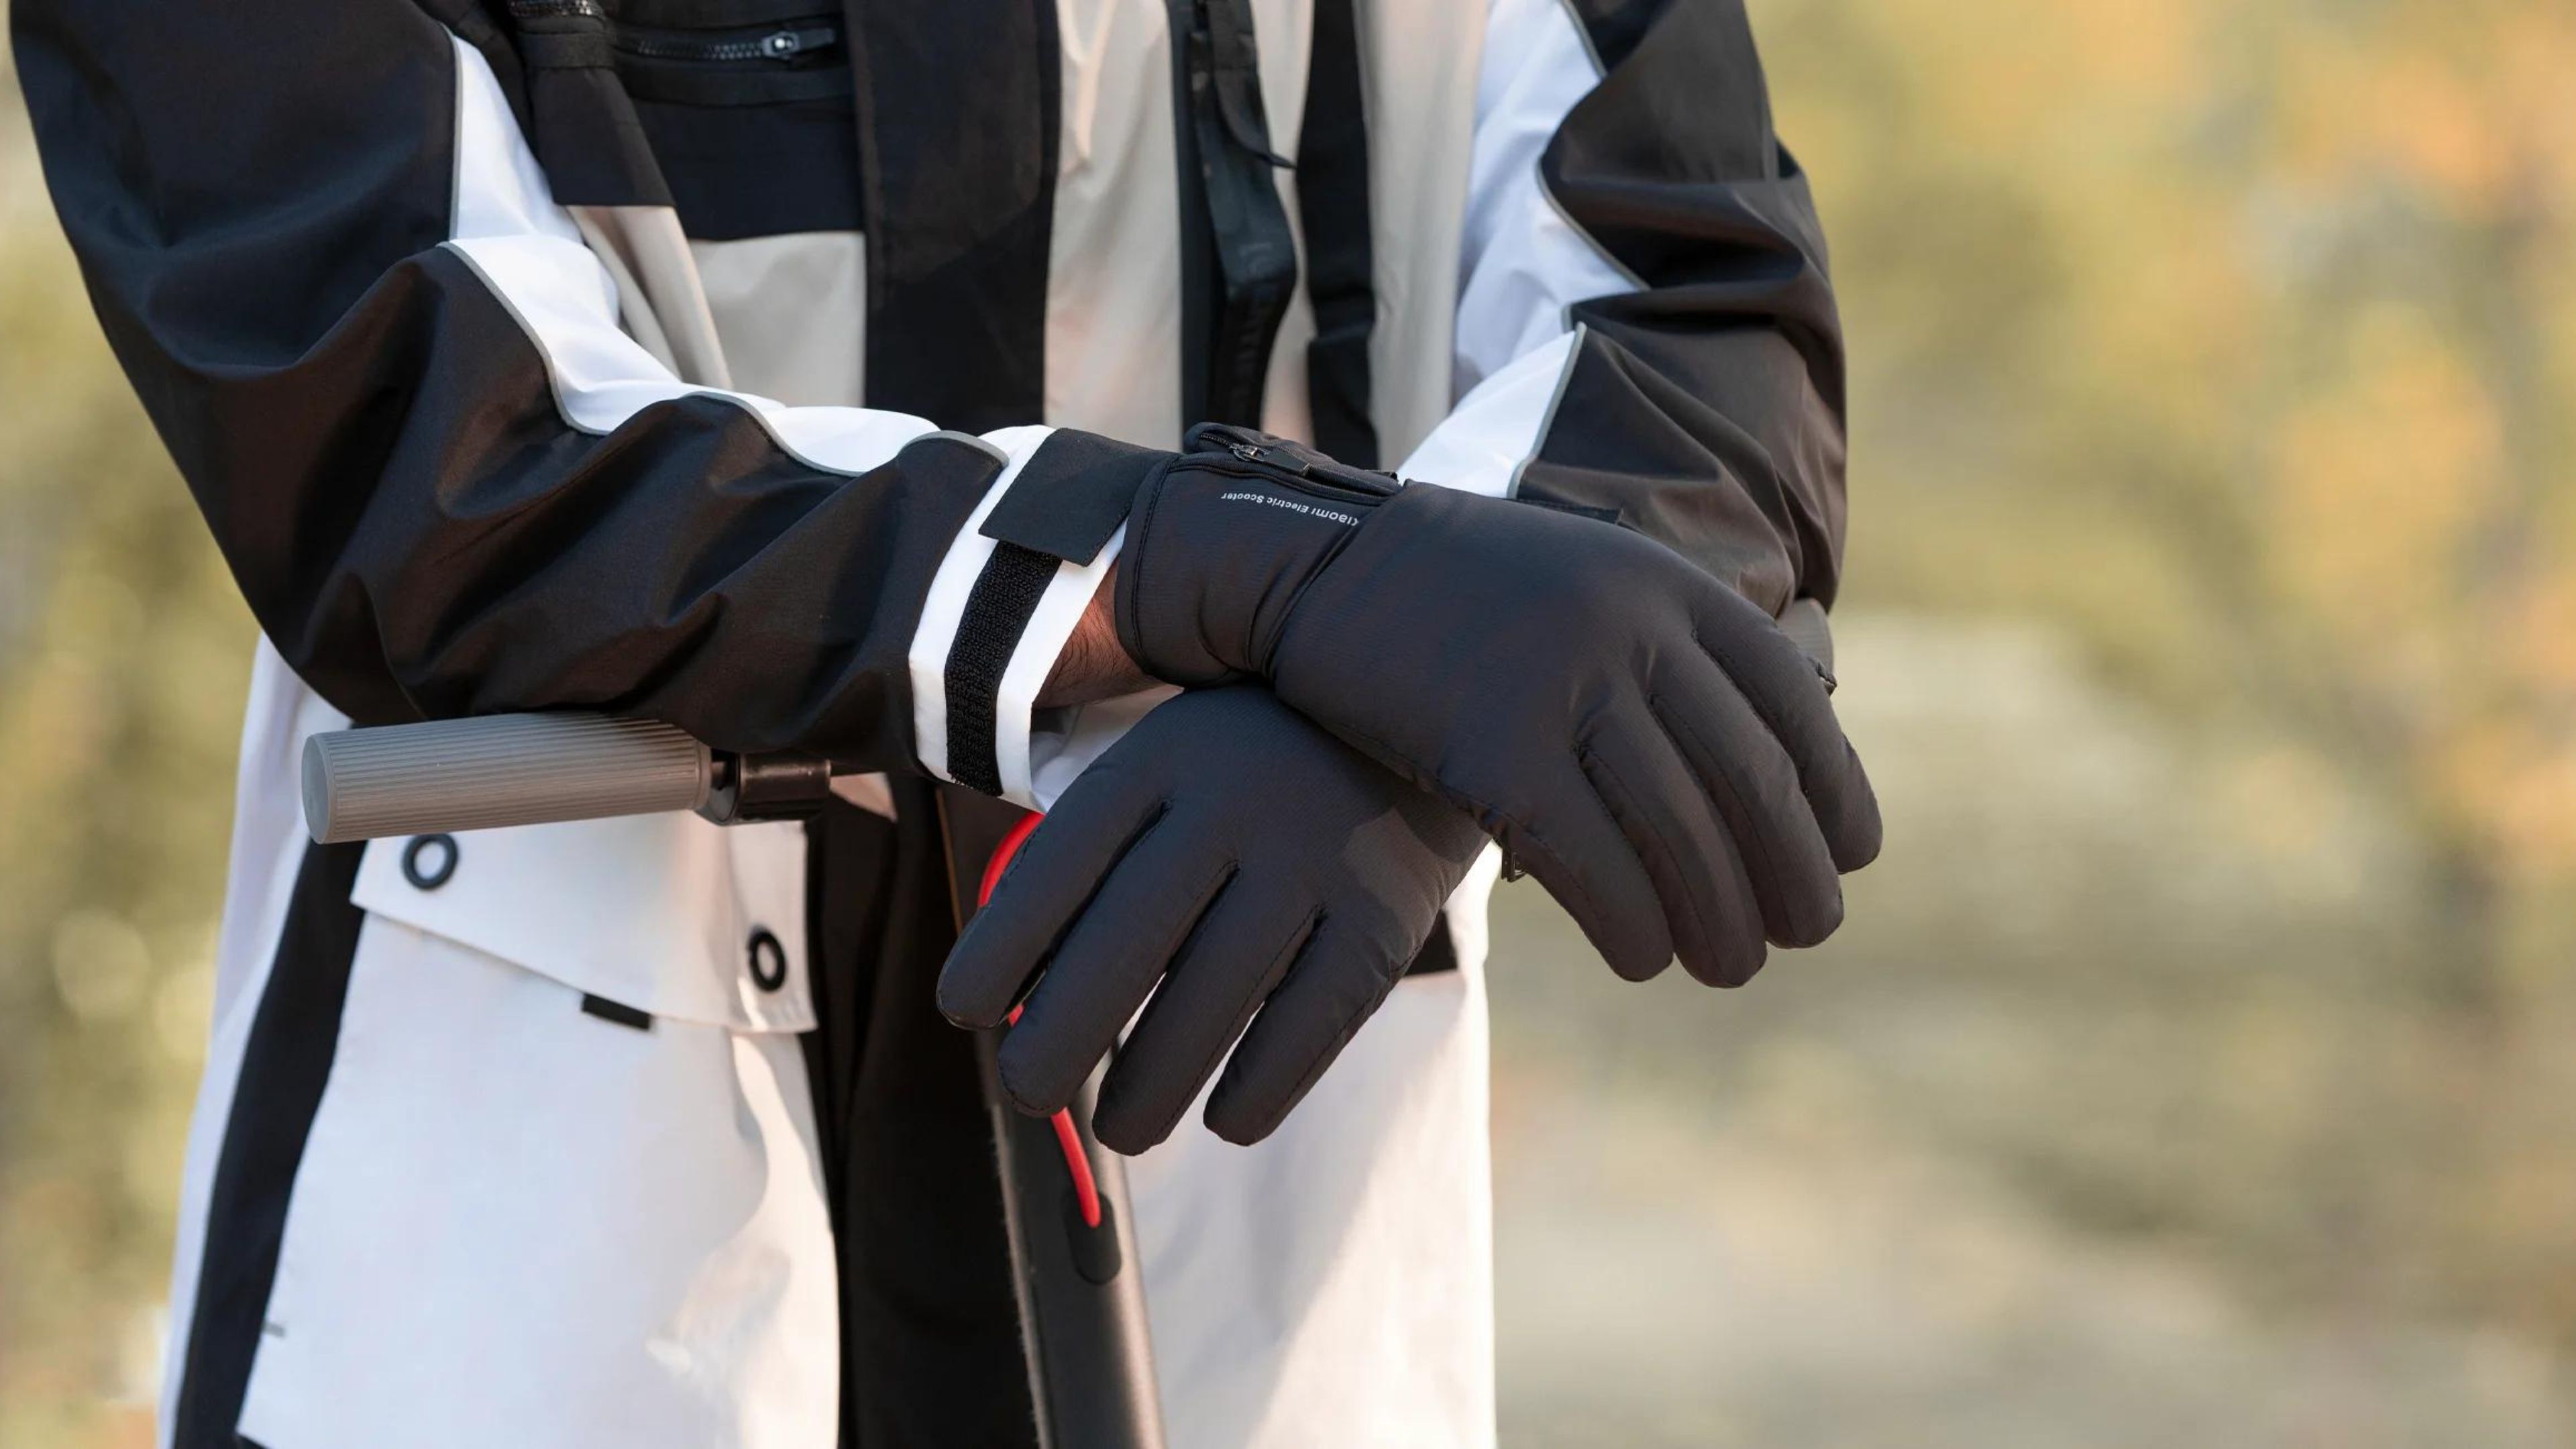 Los guantes: Xiaomi Electric Scooter Riding Gloves